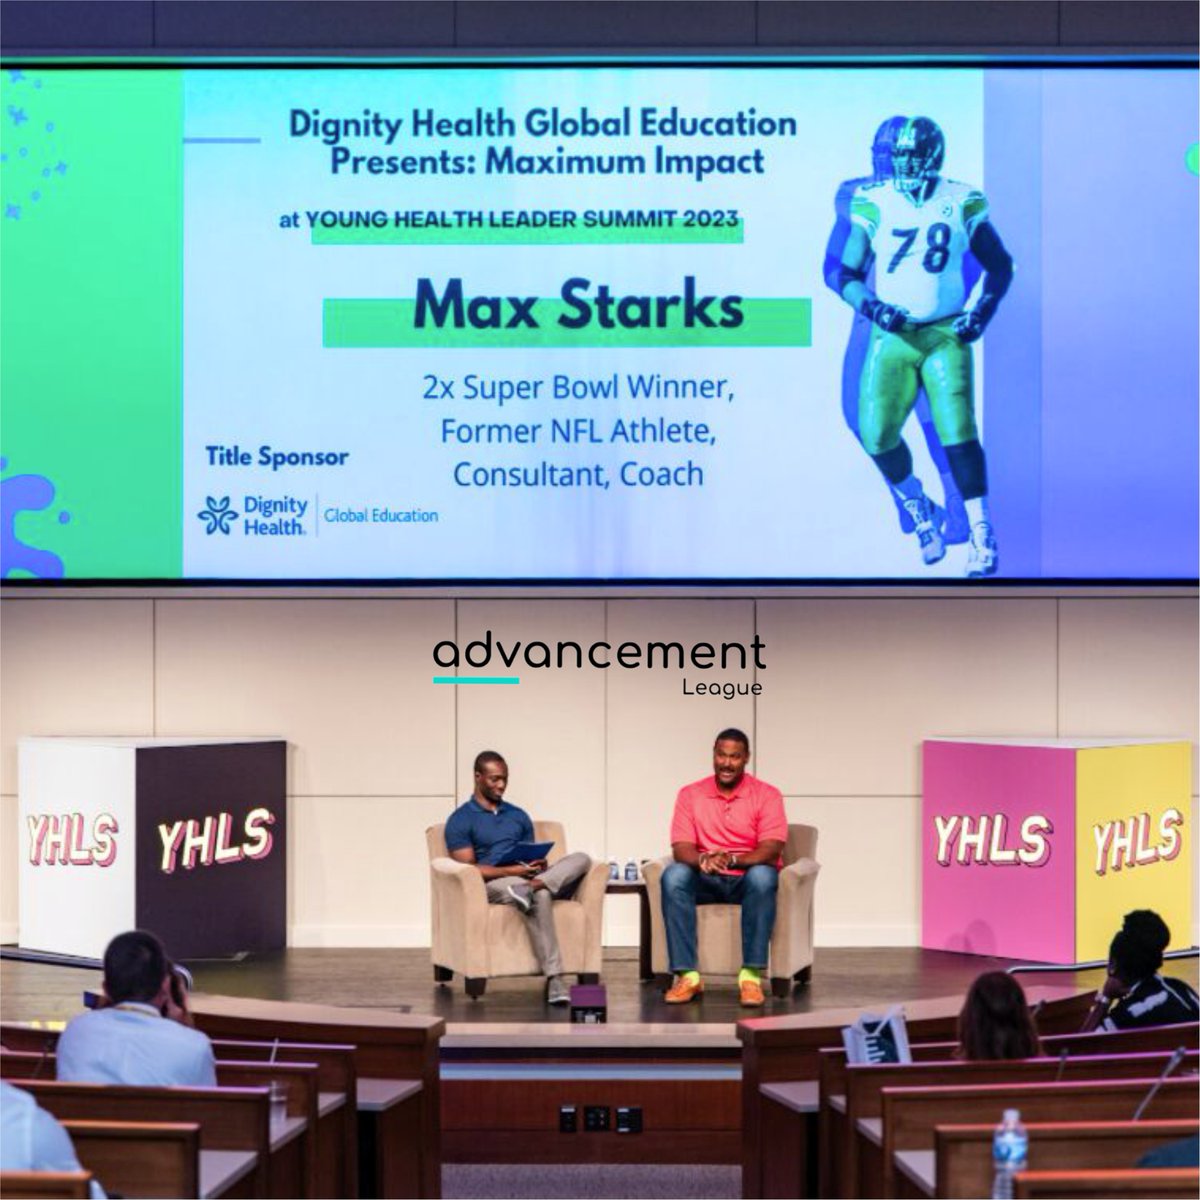 From the Super Bowl to an even bigger event stage (🤣), thank you DHGE Team for your sponsorship and support of Maximum Impact with 2x Super Bowl Winner Max Starks at YHLS 2023 🏈🏆

#advancementleague #membershipplatform #healthcare #health #community #communityimpact